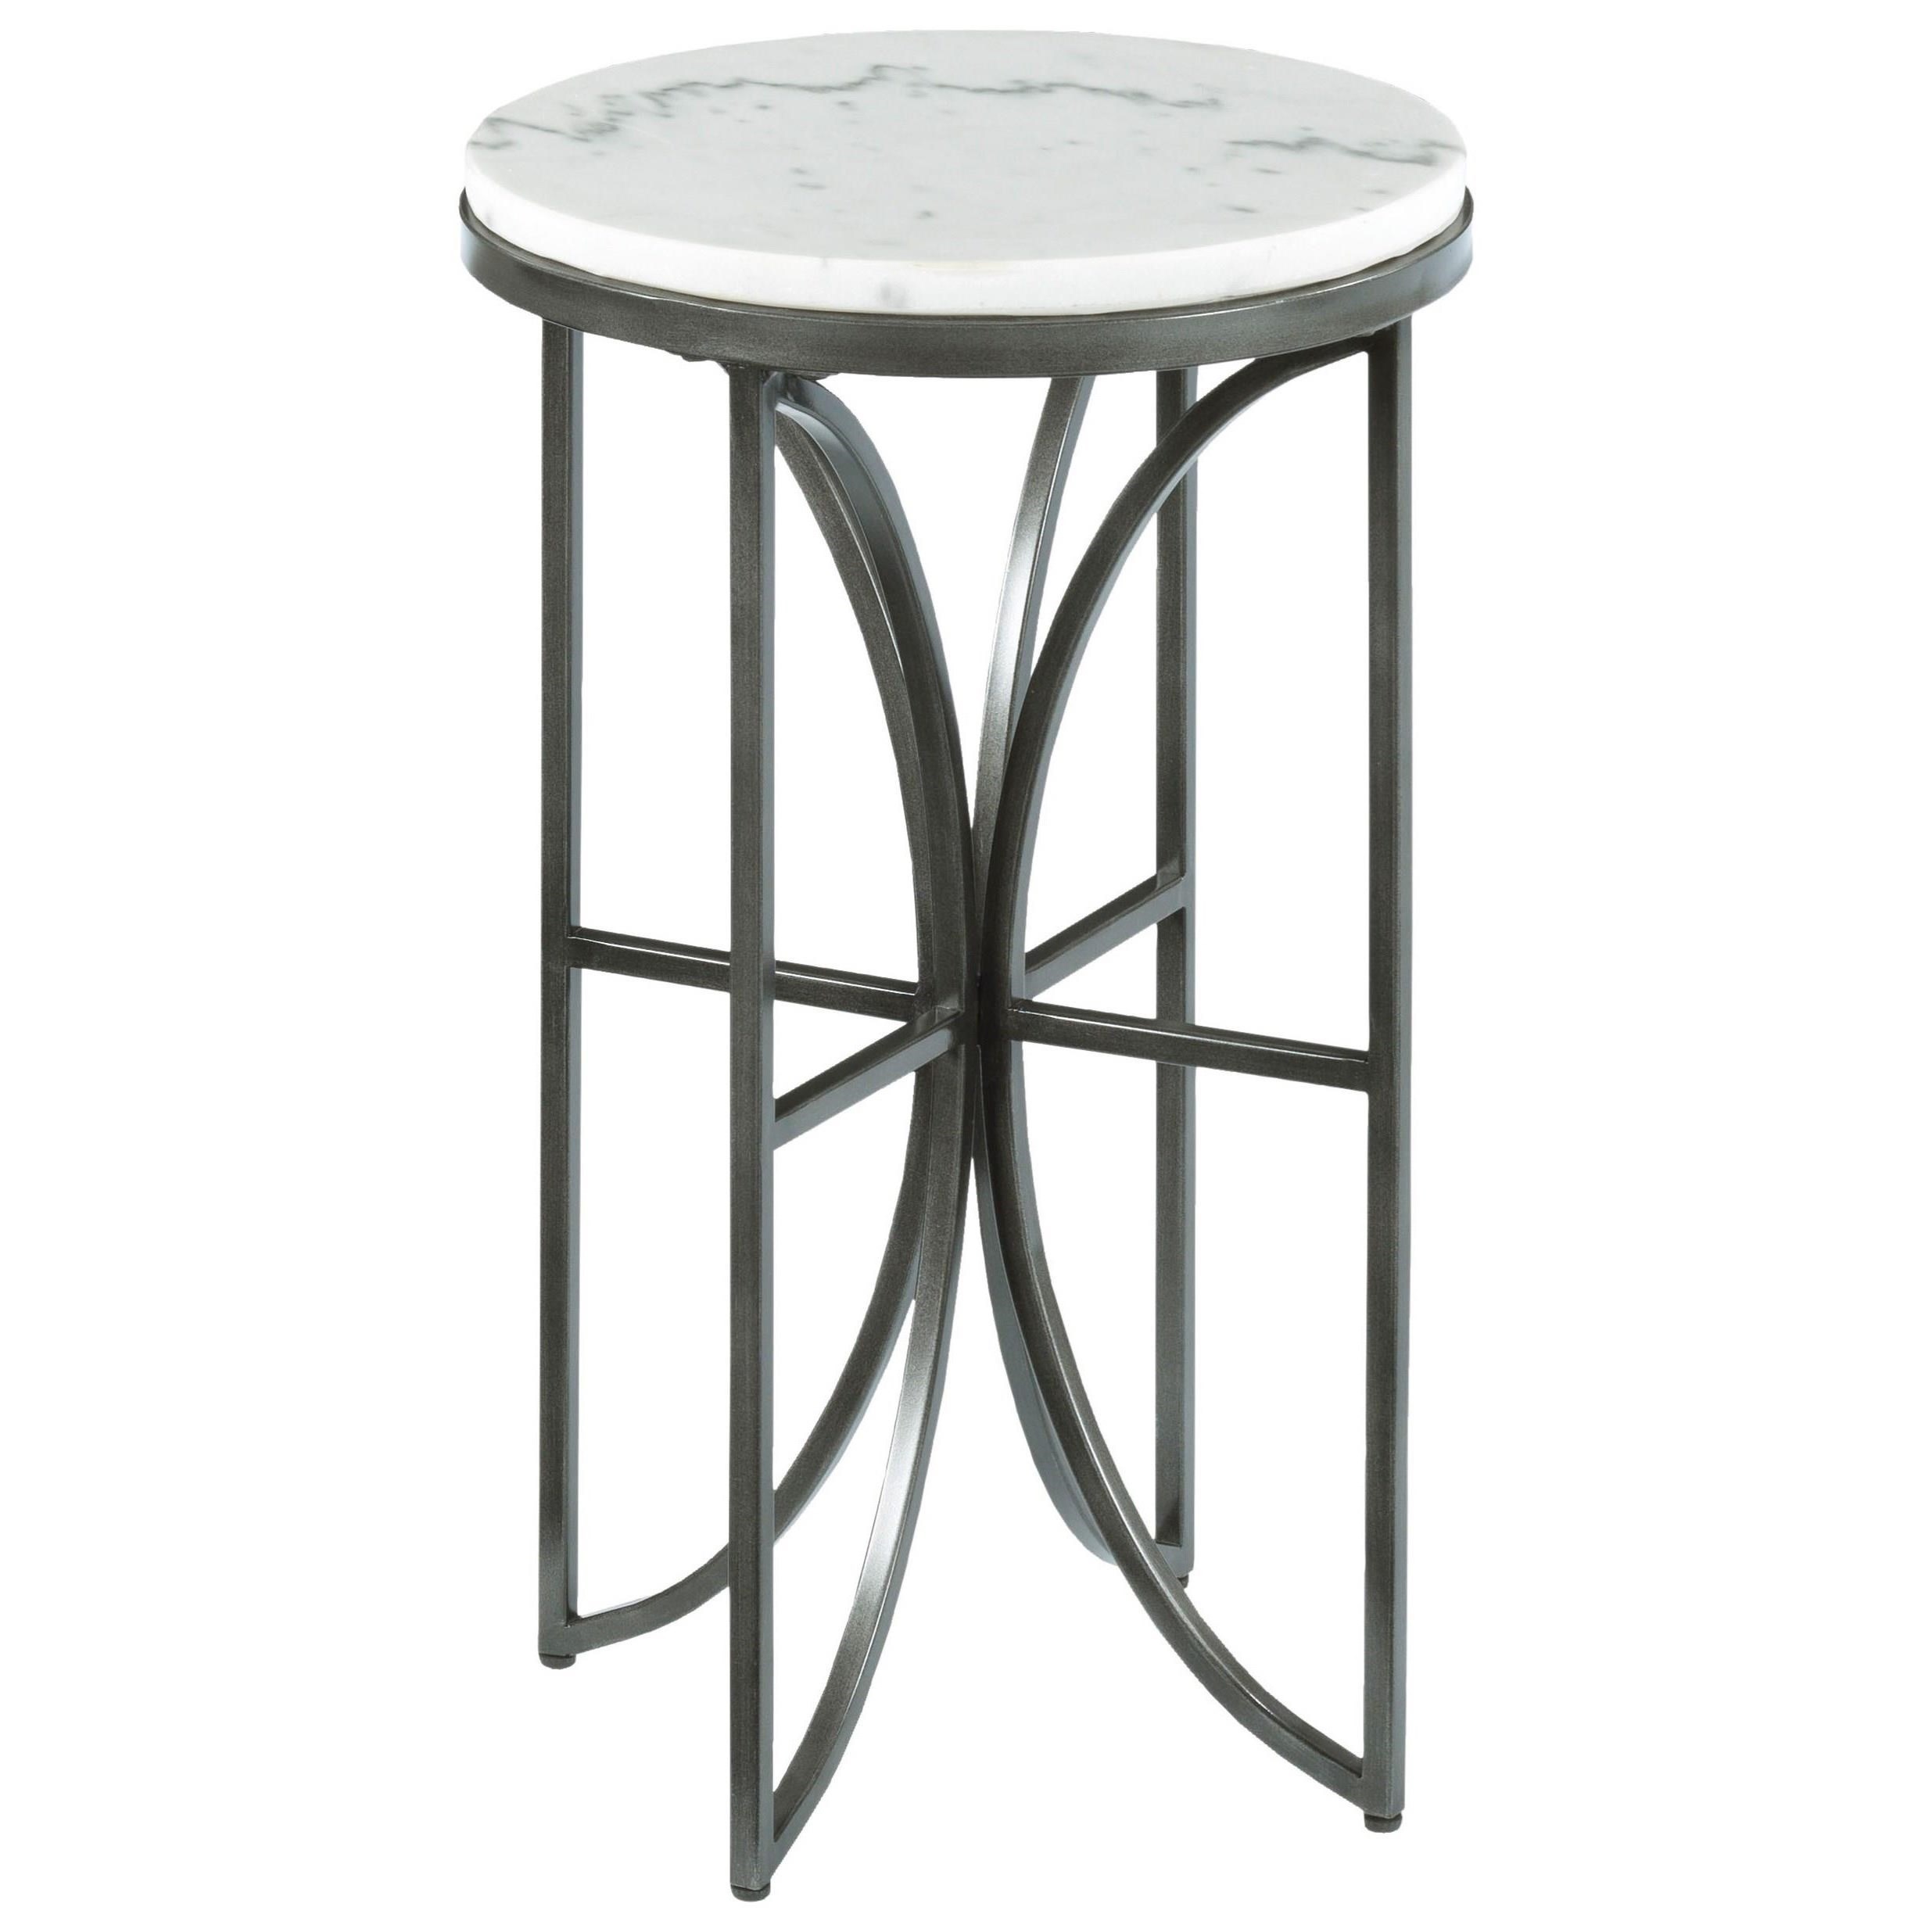 small round accent table with marble top hammary wolf and products color impact metal kitchen decor silver side large glass coffee pool chairs bunnings avenue six piece chair set